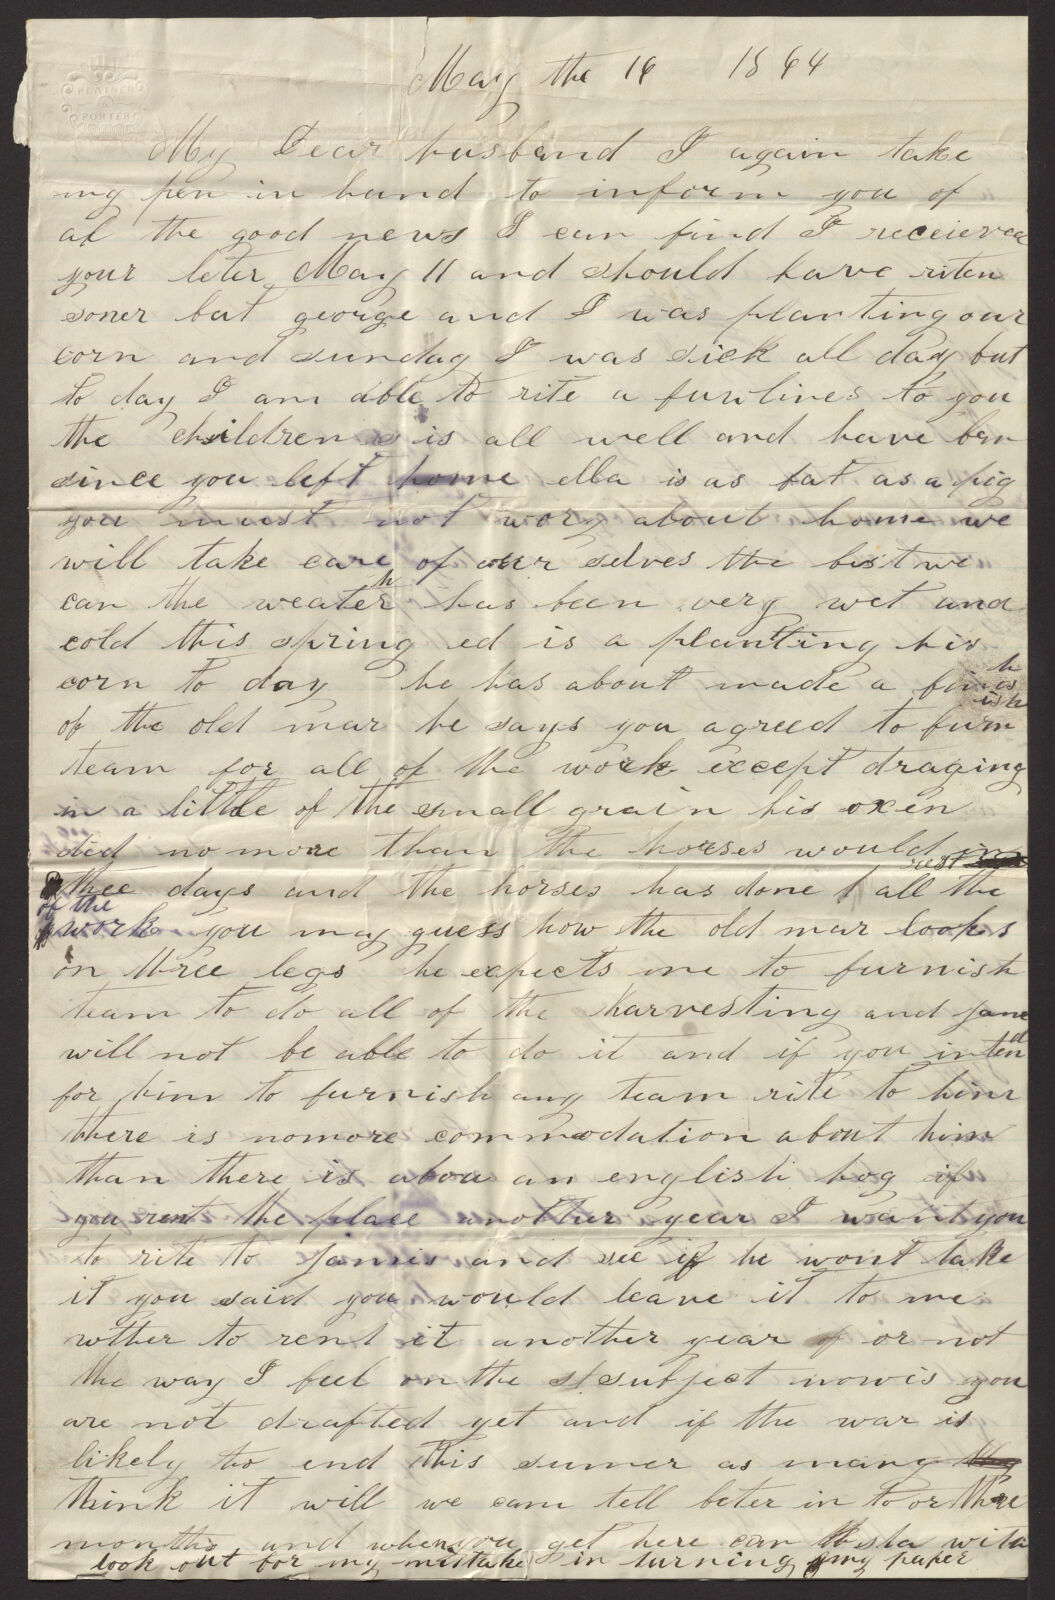 Letter from Margaret A. King to Philander B. King, May 16, 1864 ...